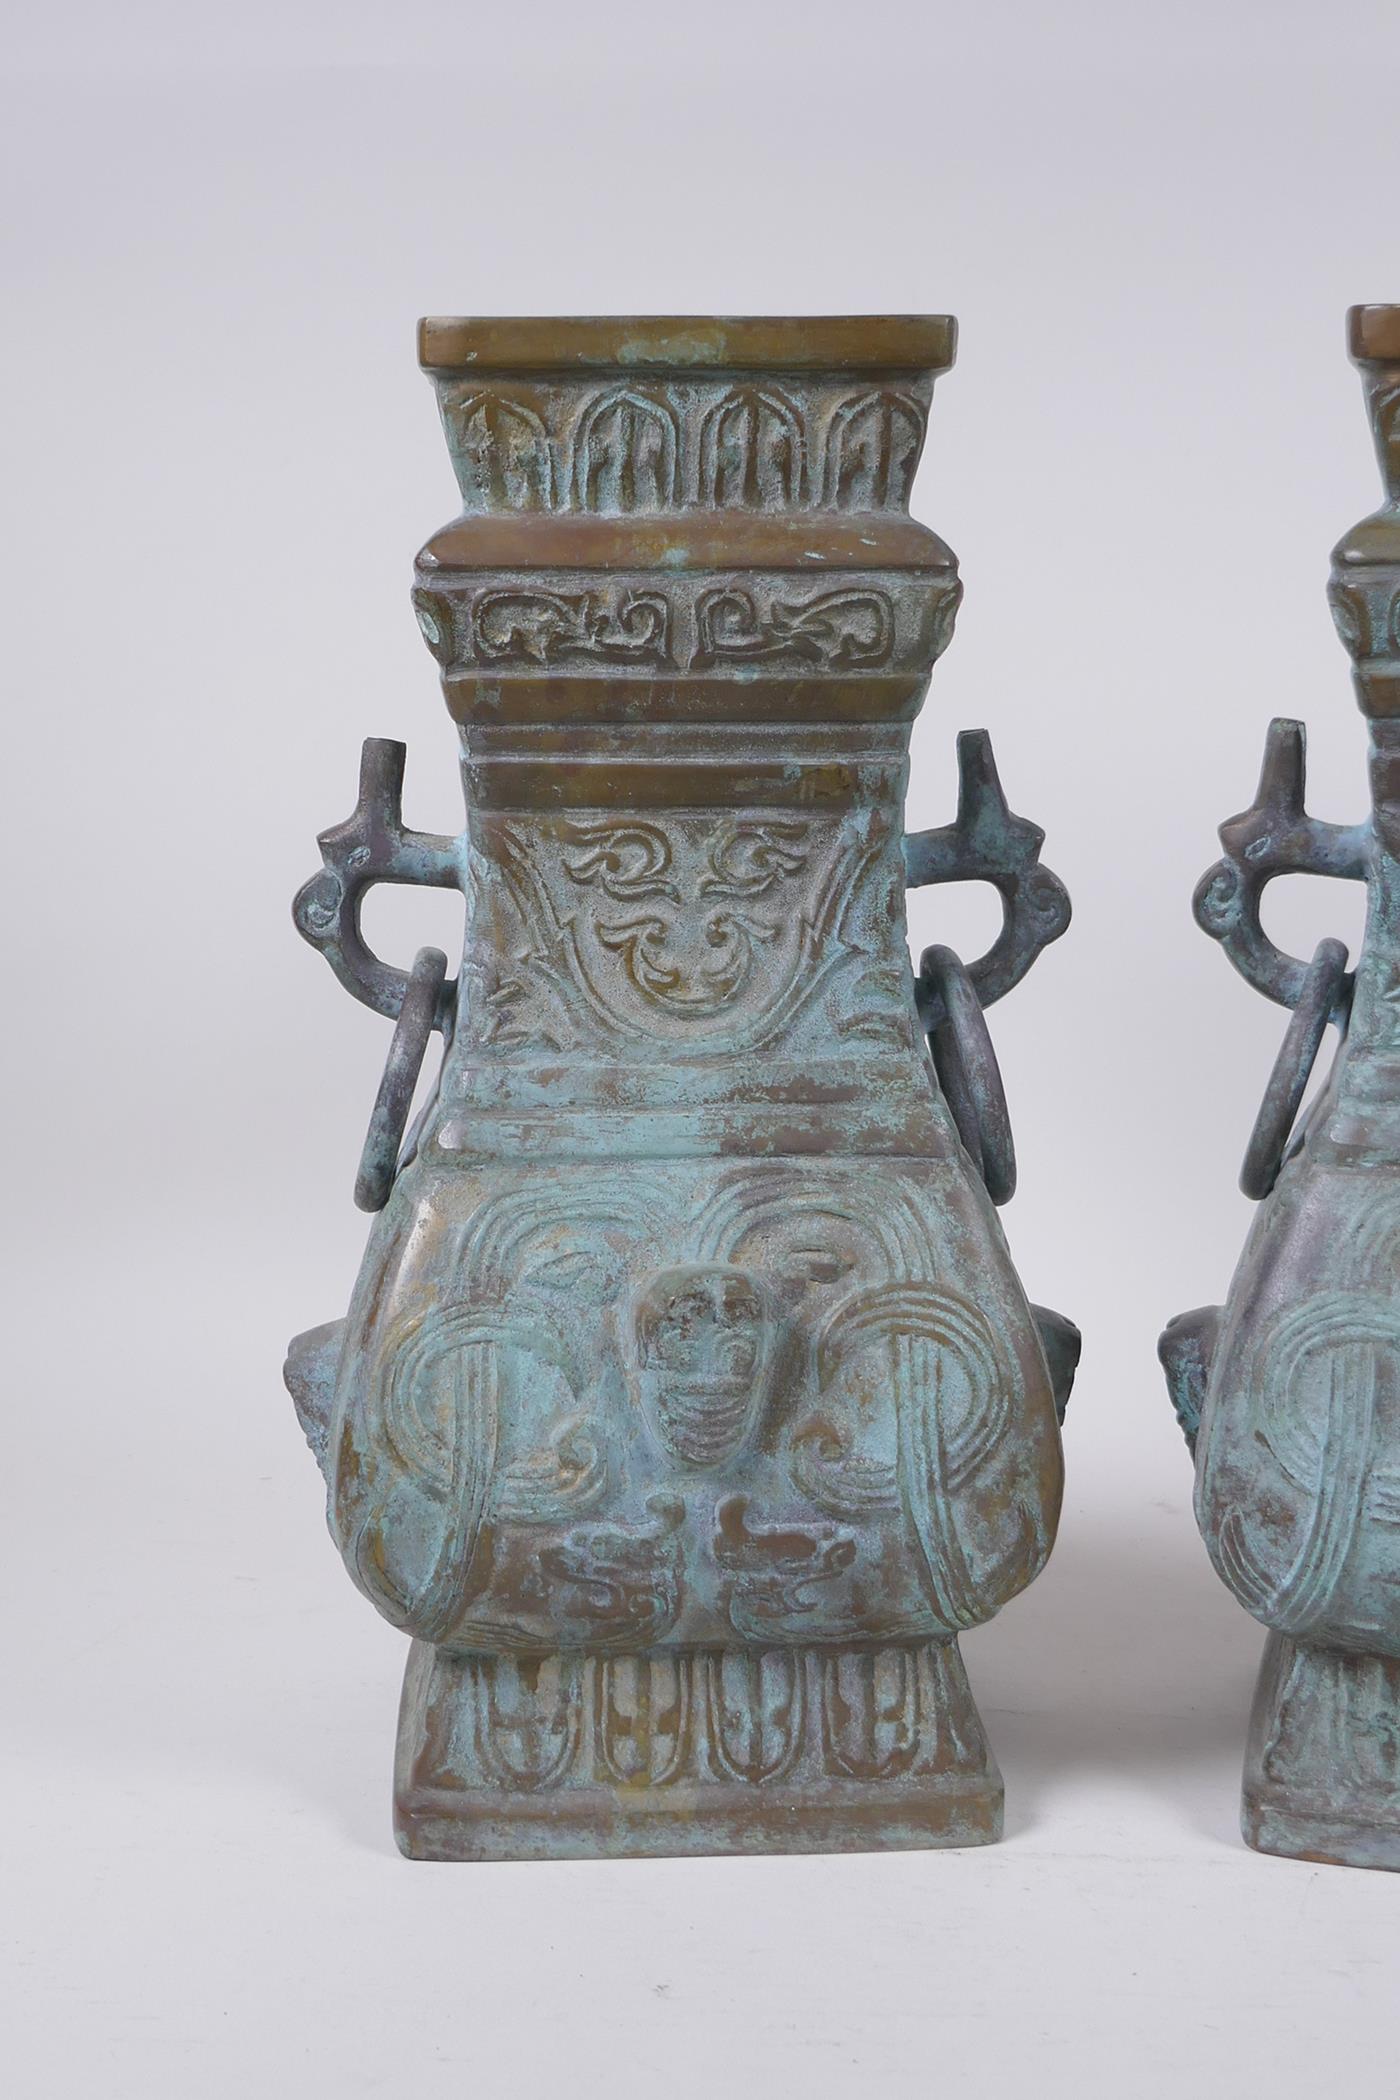 A pair of Chinese archaic style bronze vases with two dragon loop handles, lack bases, 32 cm high - Image 2 of 4